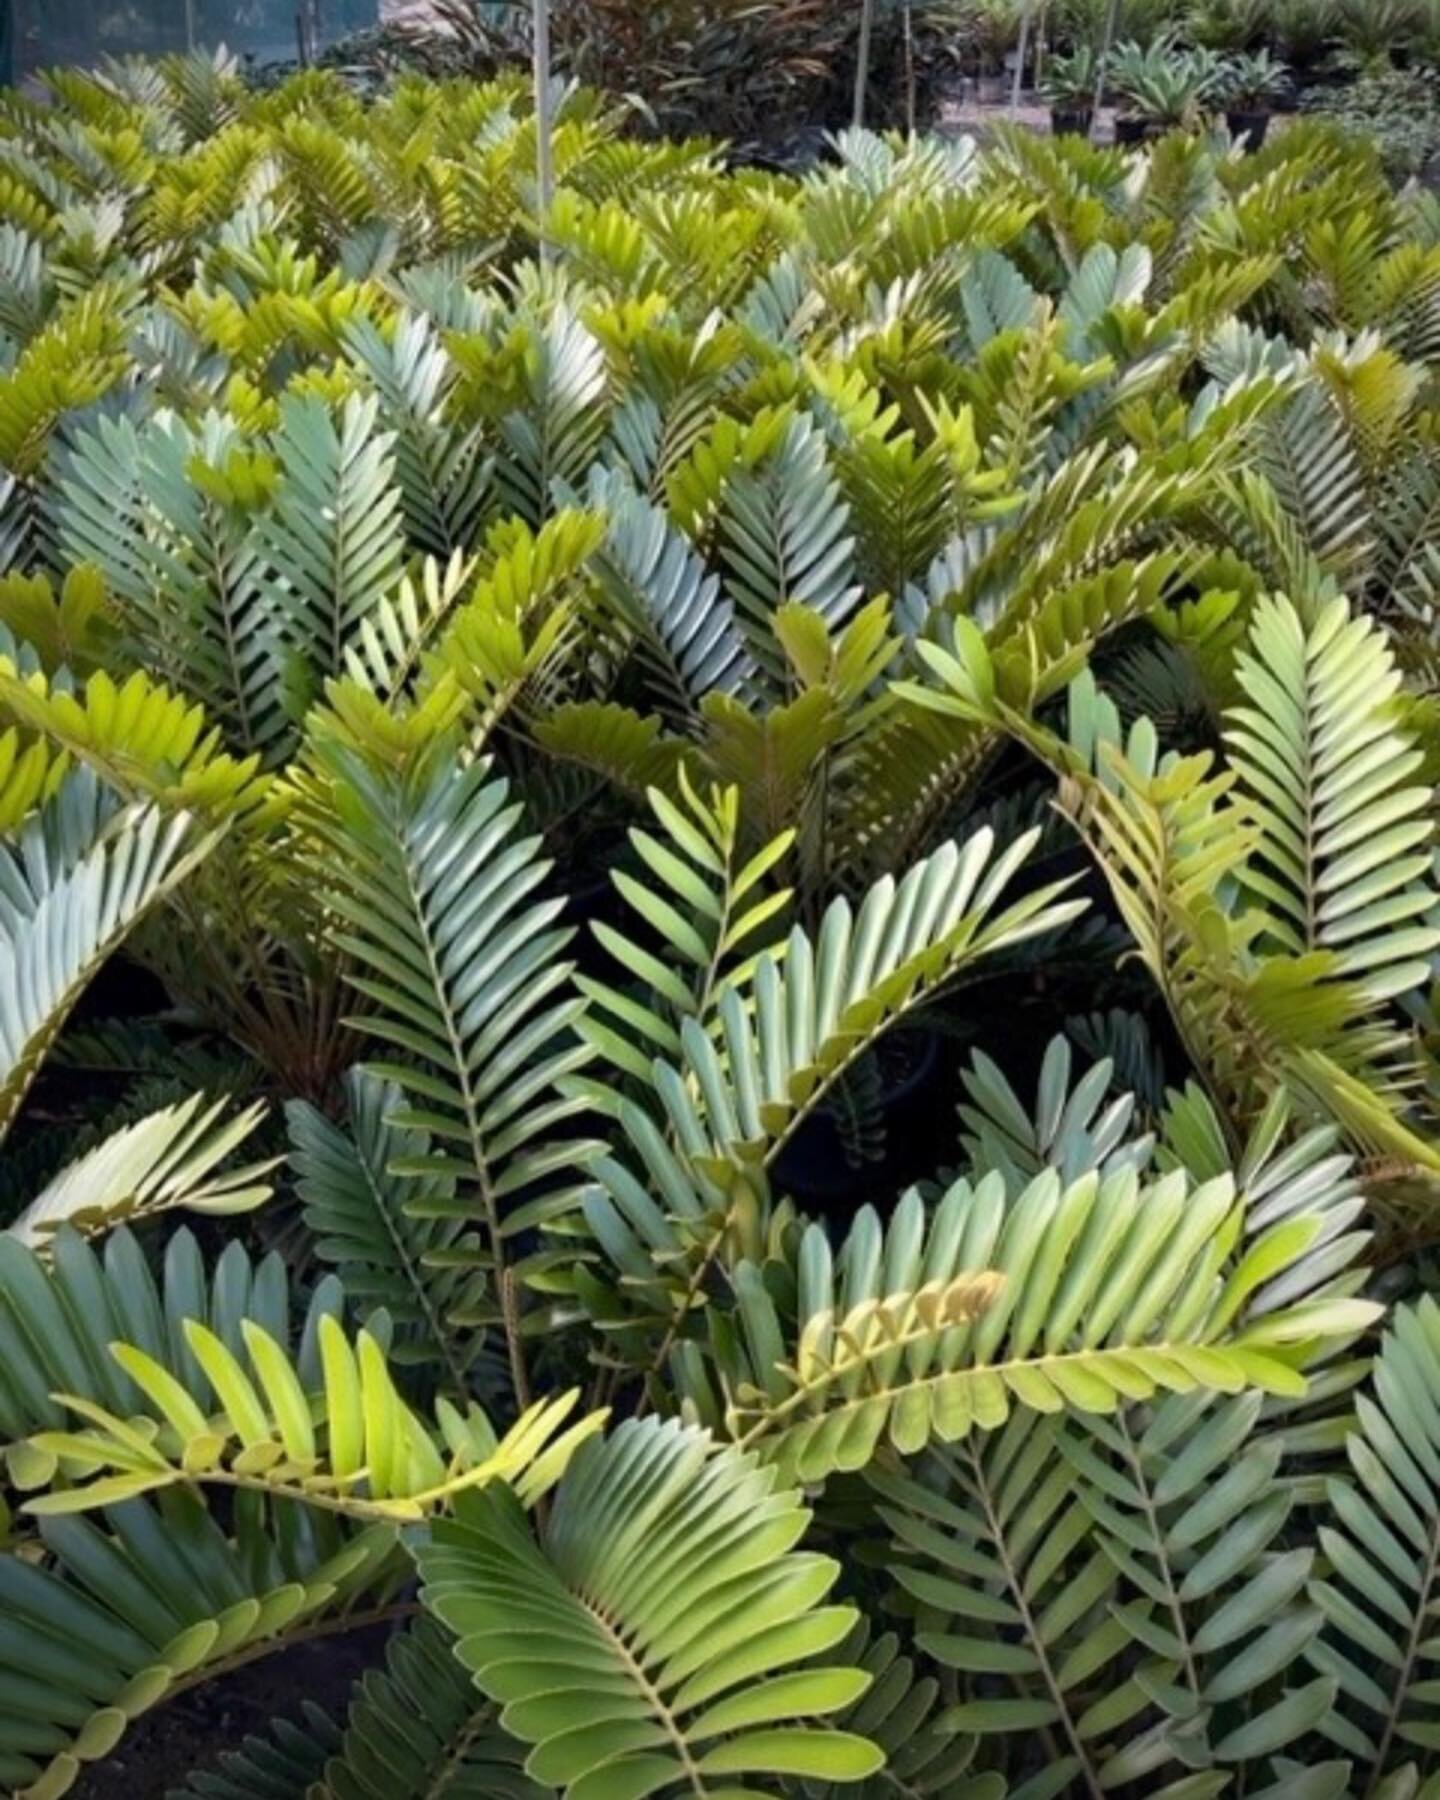 Zamia furfuracea 400mm
Popular low maintenance evergreen plant, with striking arching stems and felty green leaves. Tolerates part shade to full sun. Note toxic to human and pets.
 
#thelandscapeassociation #kenthurstnursery #kenthurst #sydney #nsw #